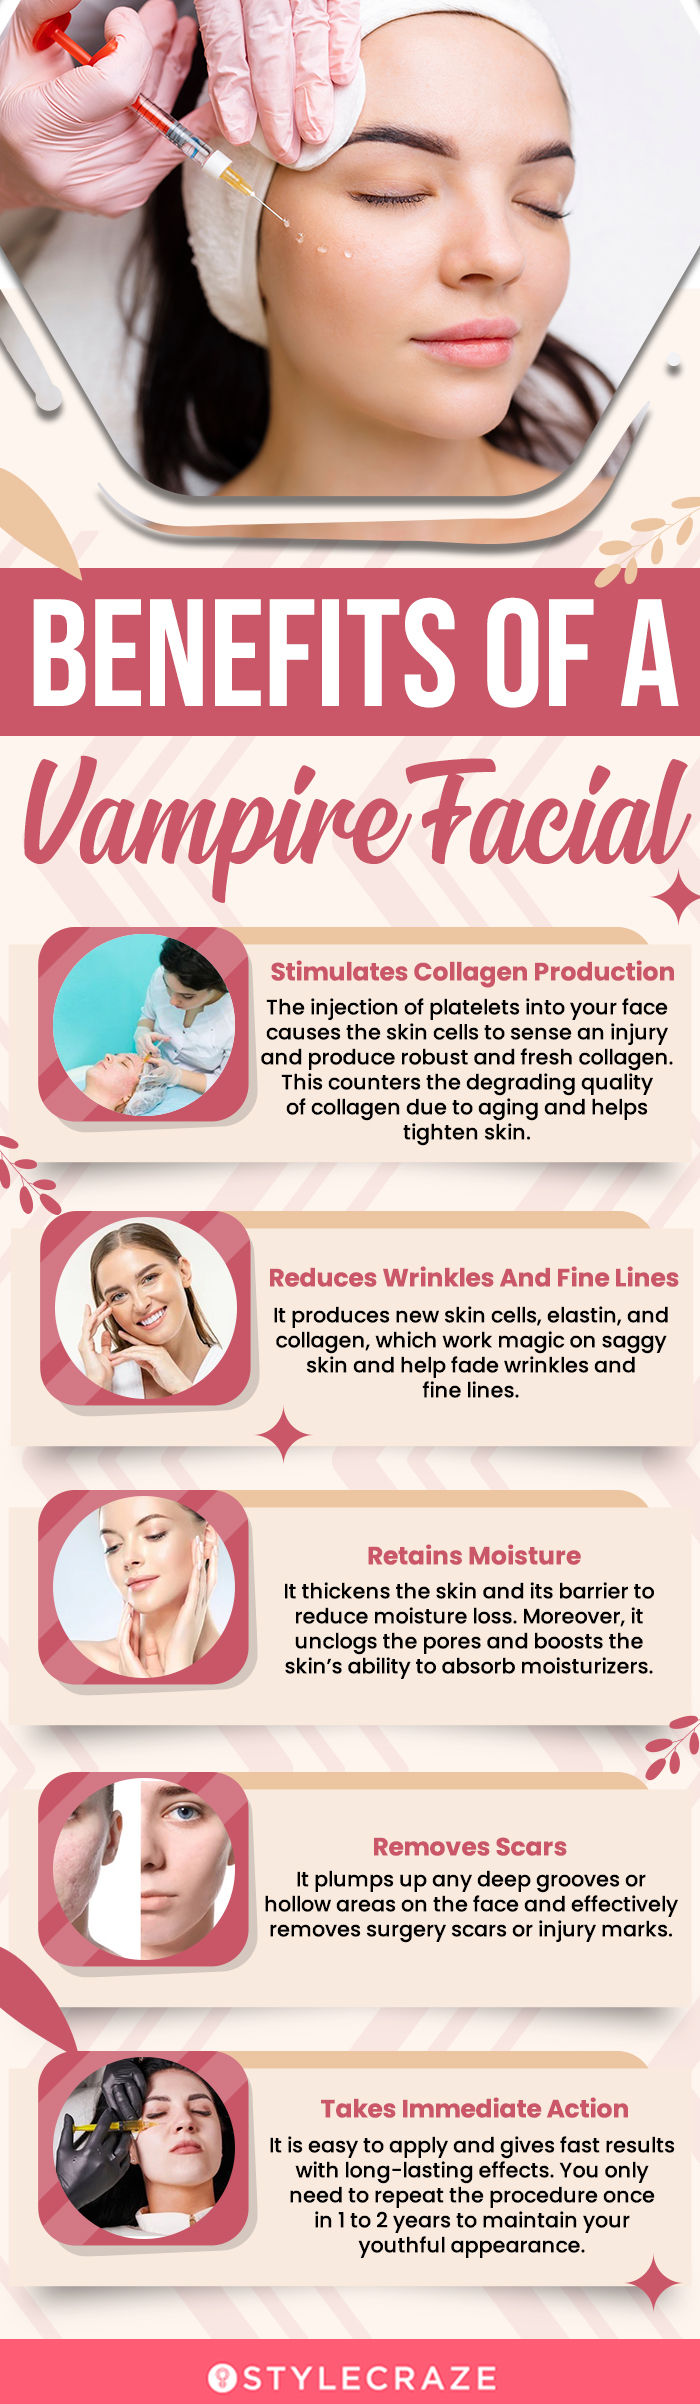 benefits of a vampire facial (infographic)